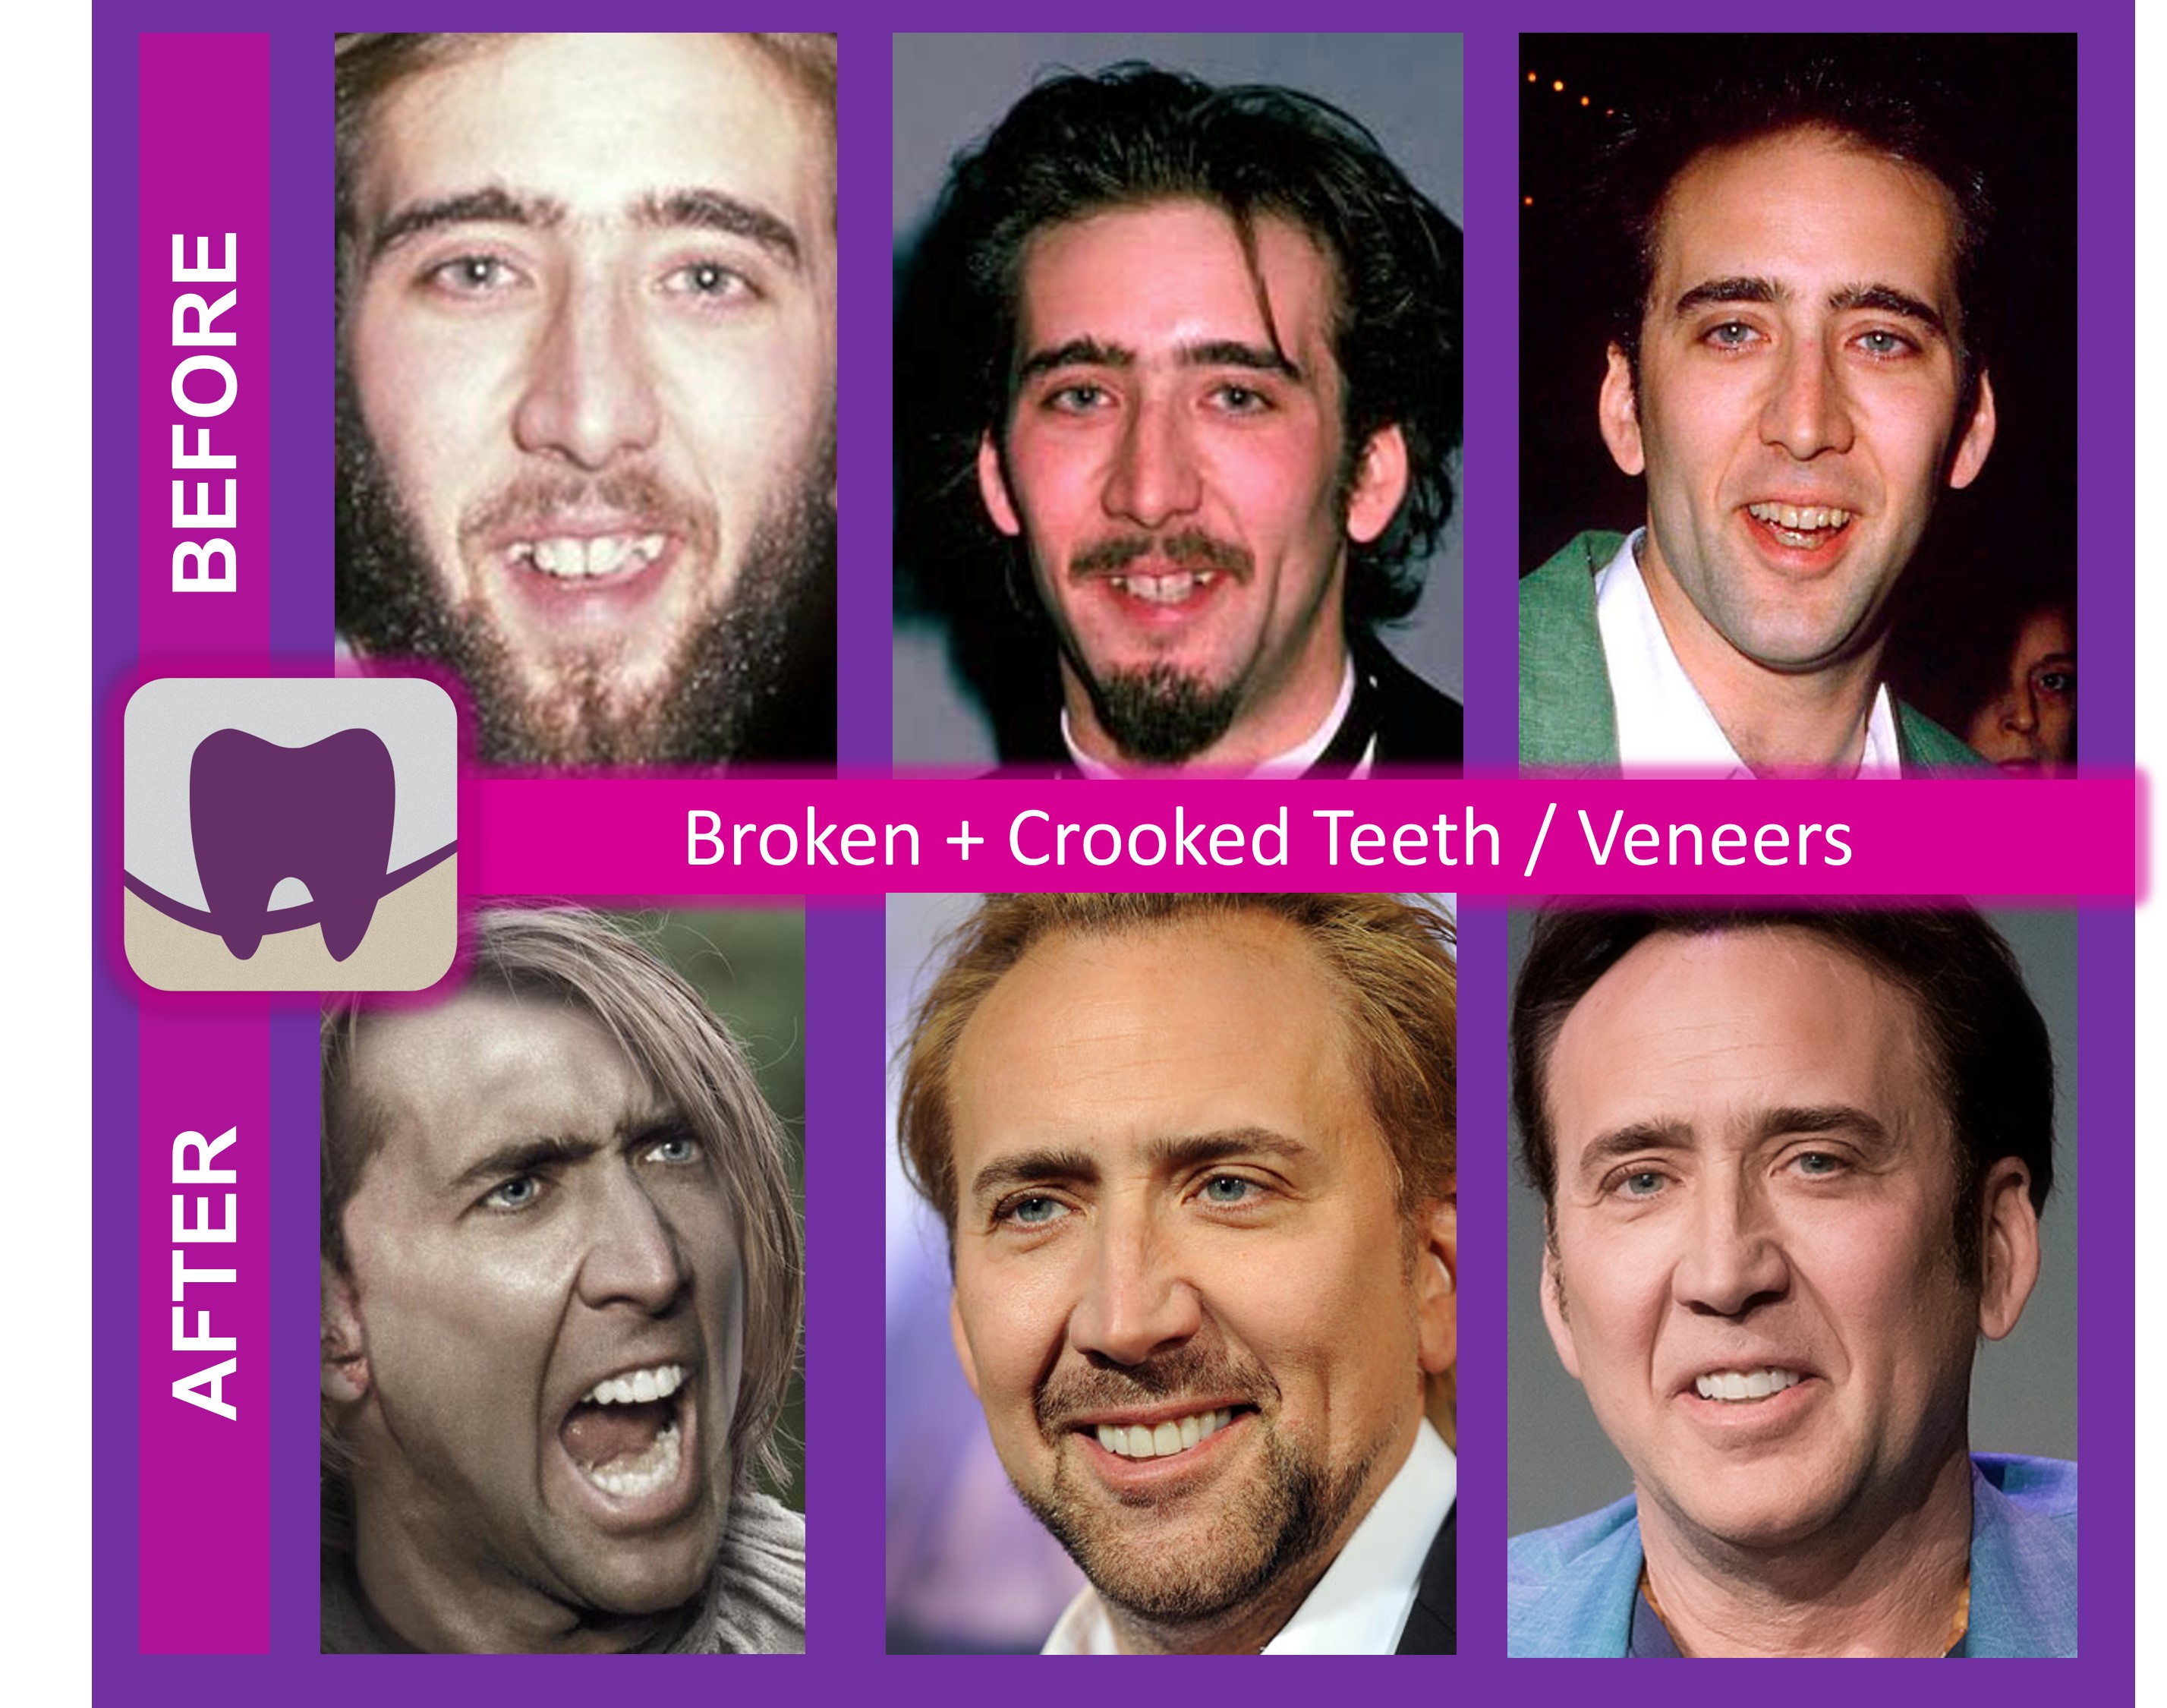 Nicolas Cage Before and After